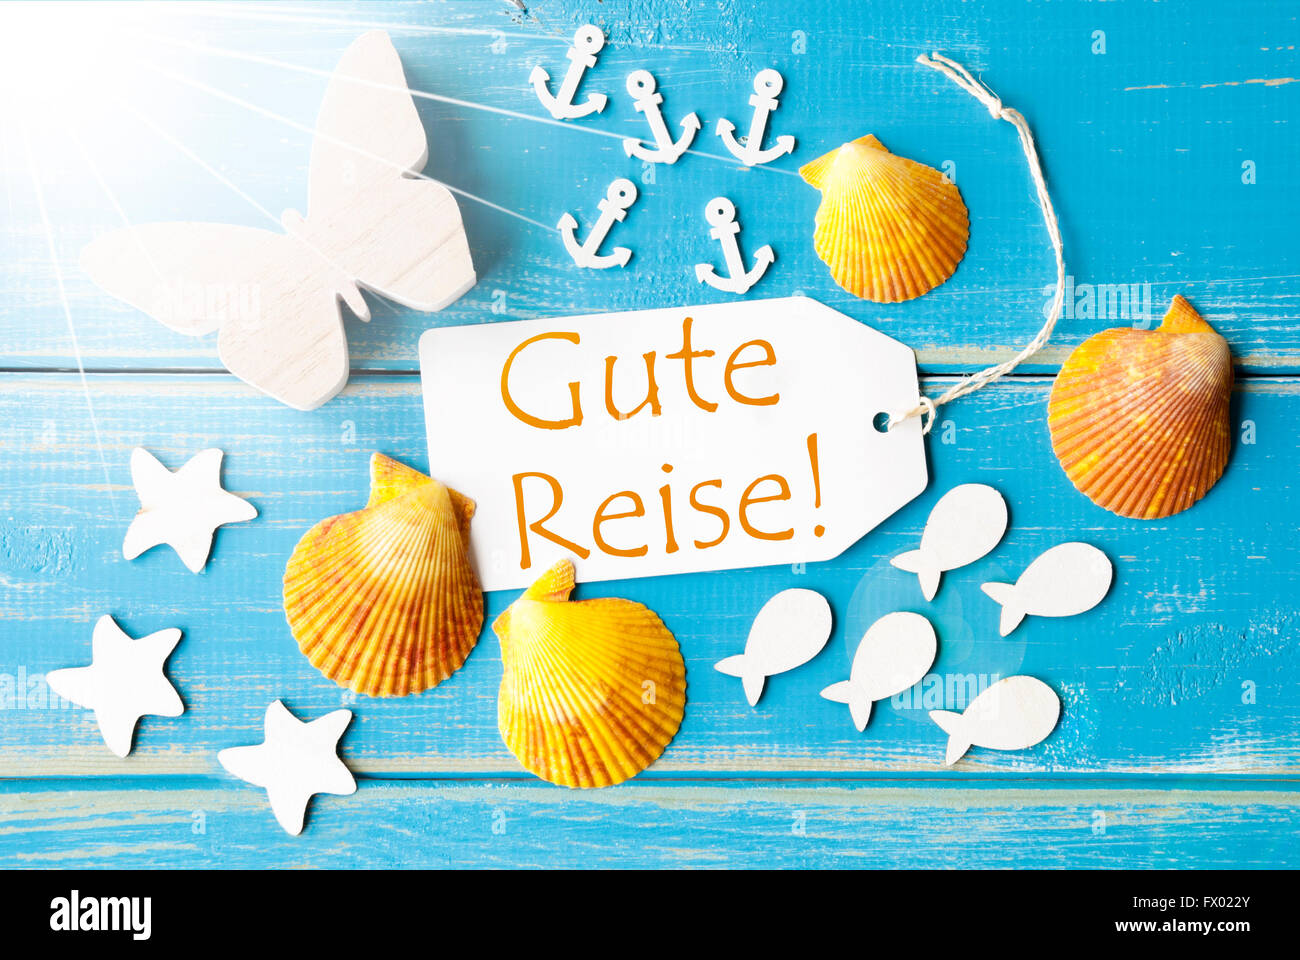 Sunny Summer Greeting Card With Gute Reise Means Good Trip Stock Photo ...